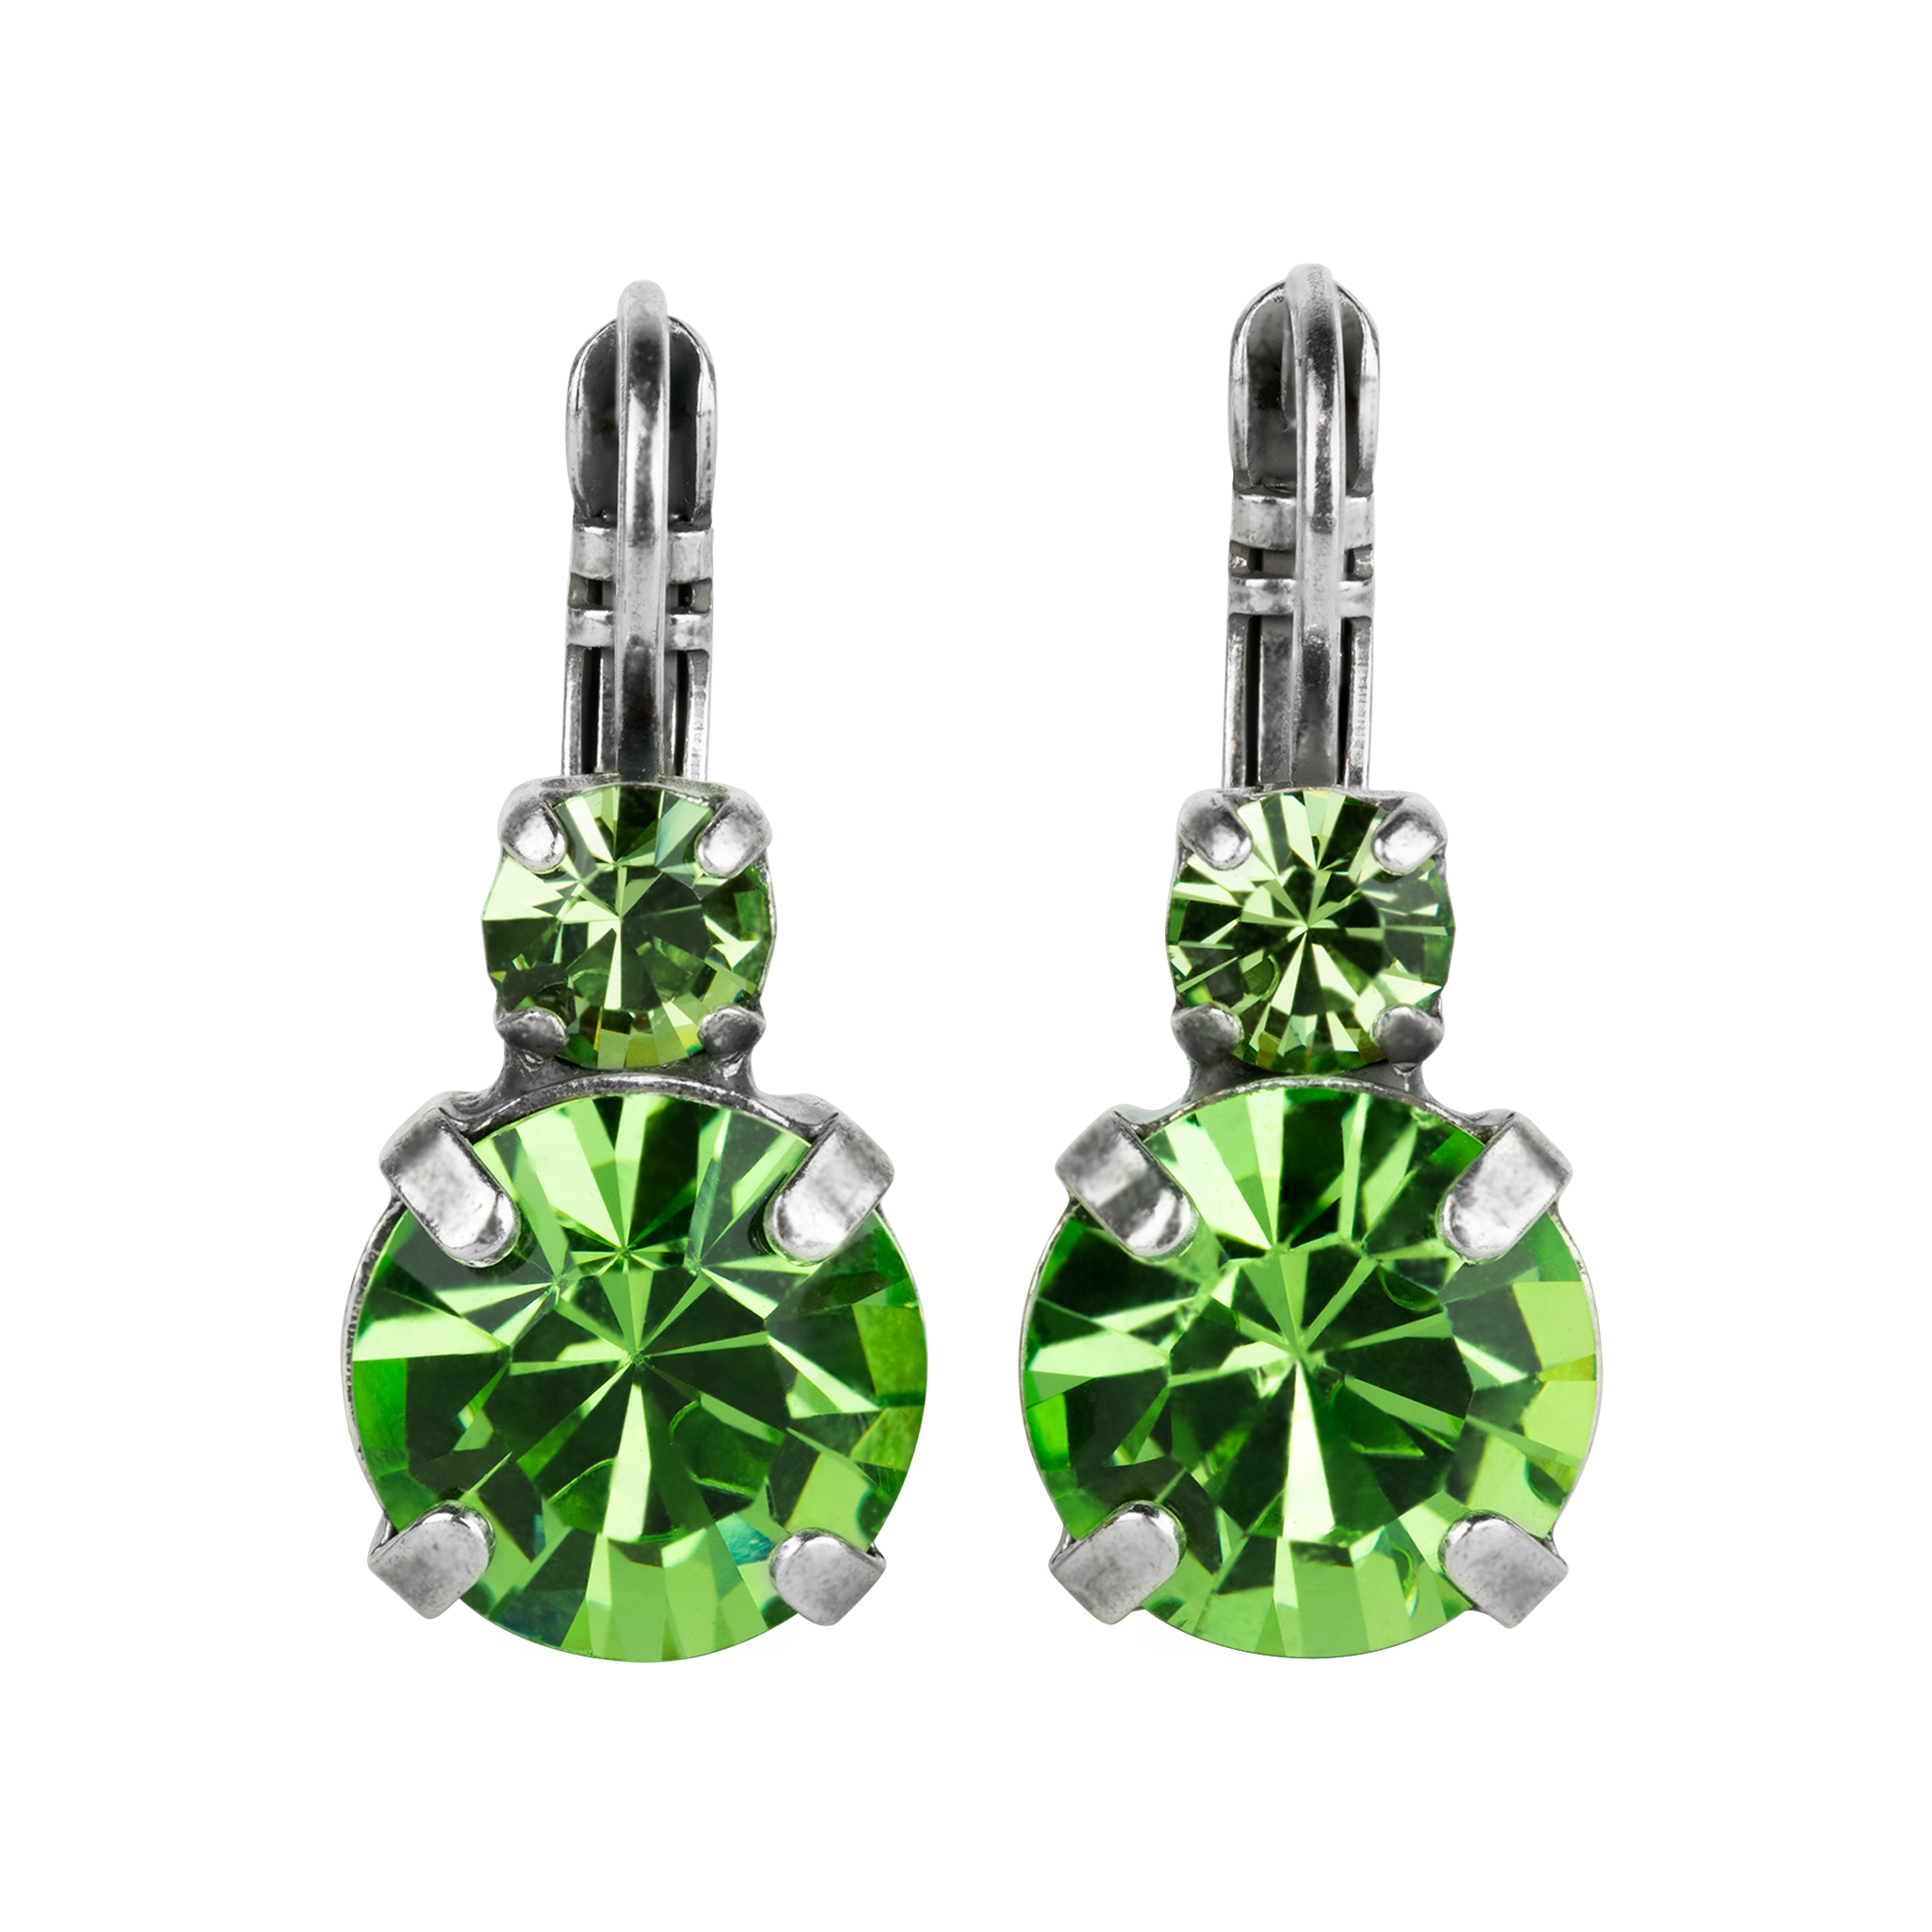 Mariana Silver Must-Have Double Stone Crystal Leverback Earrings in “Peridot"